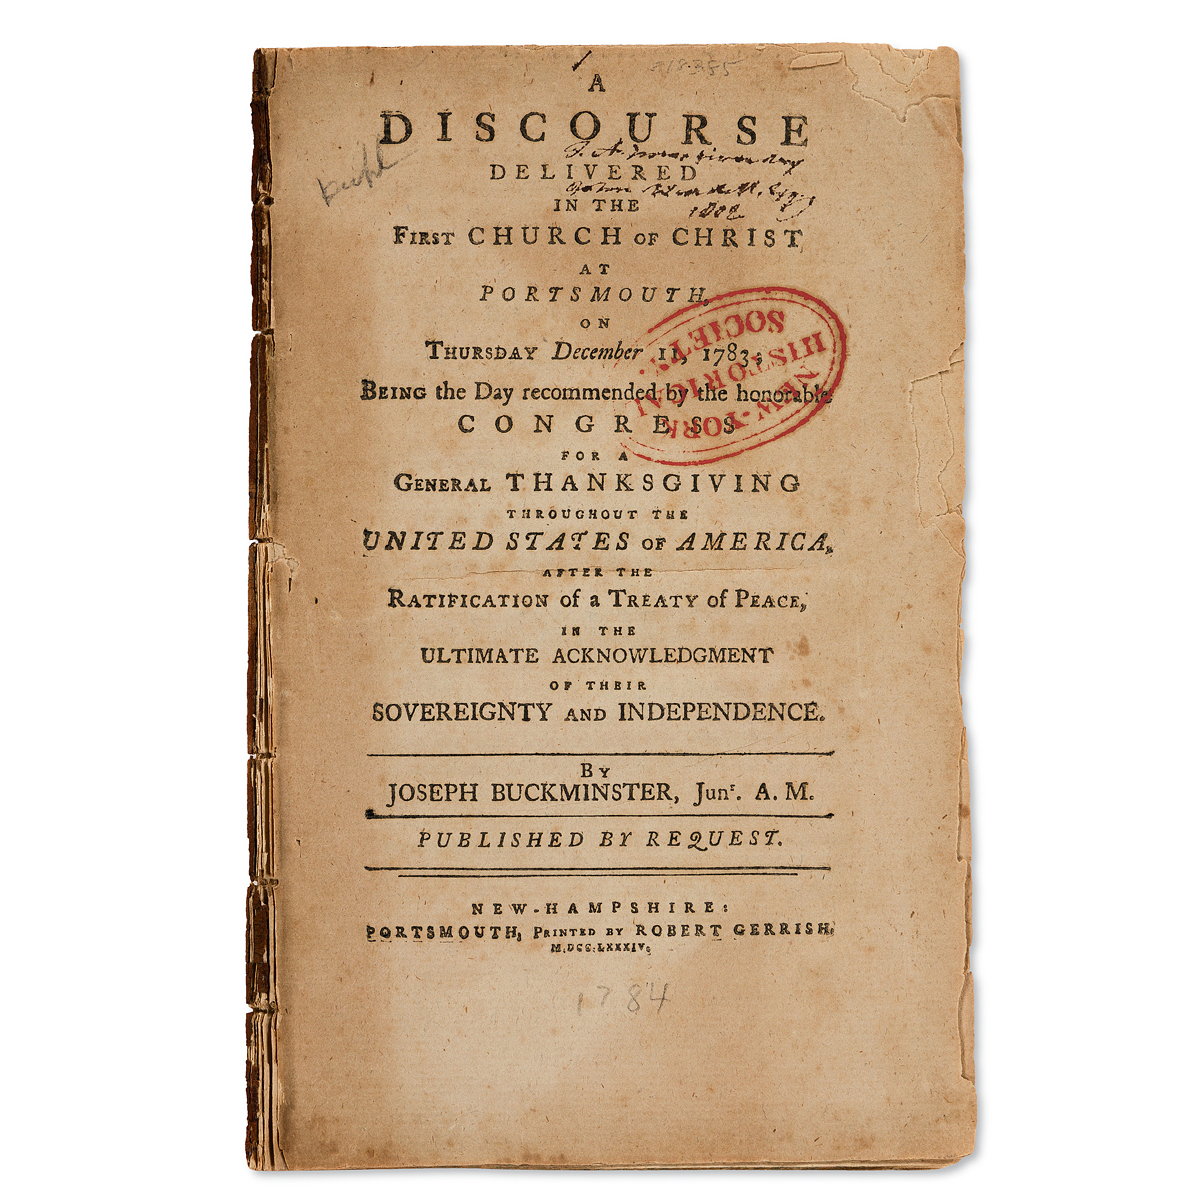 (AMERICAN REVOLUTION--1783.) Joseph Buckminster. A Discourse Delivered . . . for a General Thanksgiving